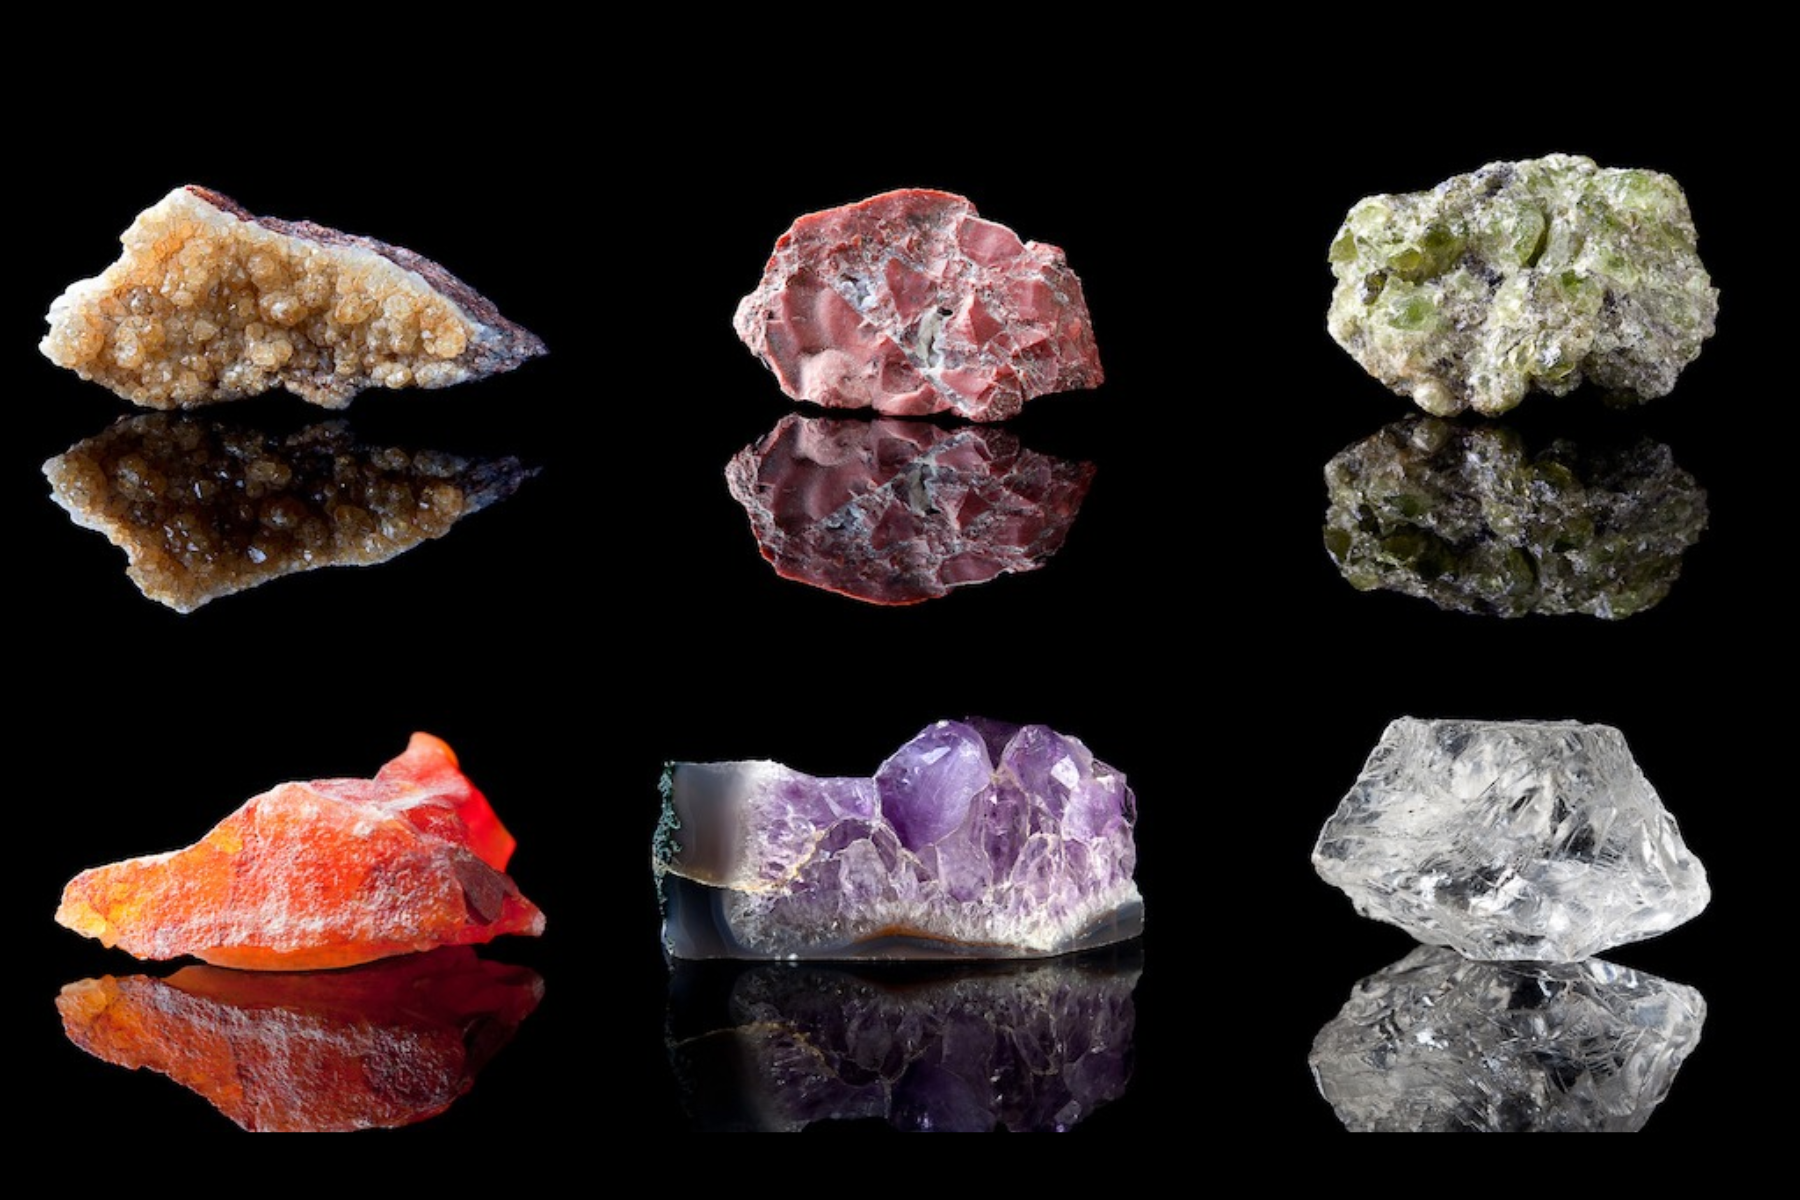 The image shows six raw stones of different types